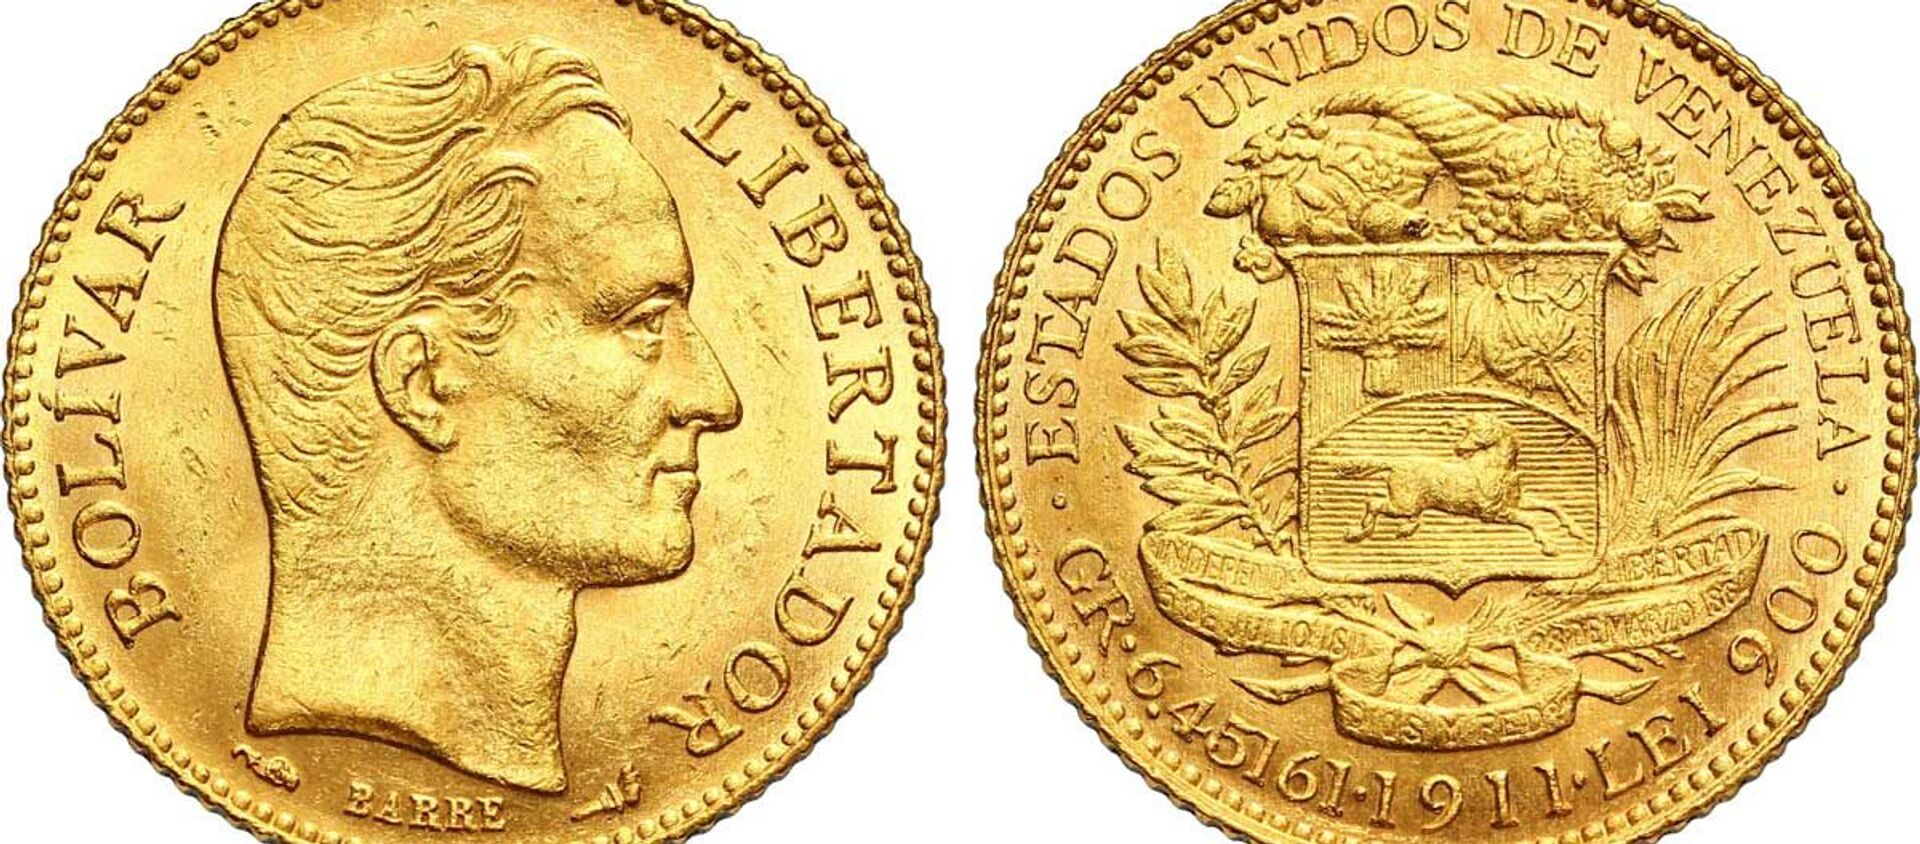 1911 gold 20 bolivares coin featuring the face of Simon Bolivar, a Venezuelan political leader and general who led much of Latin America to independence from the Spanish Empire. - Sputnik International, 1920, 26.02.2021